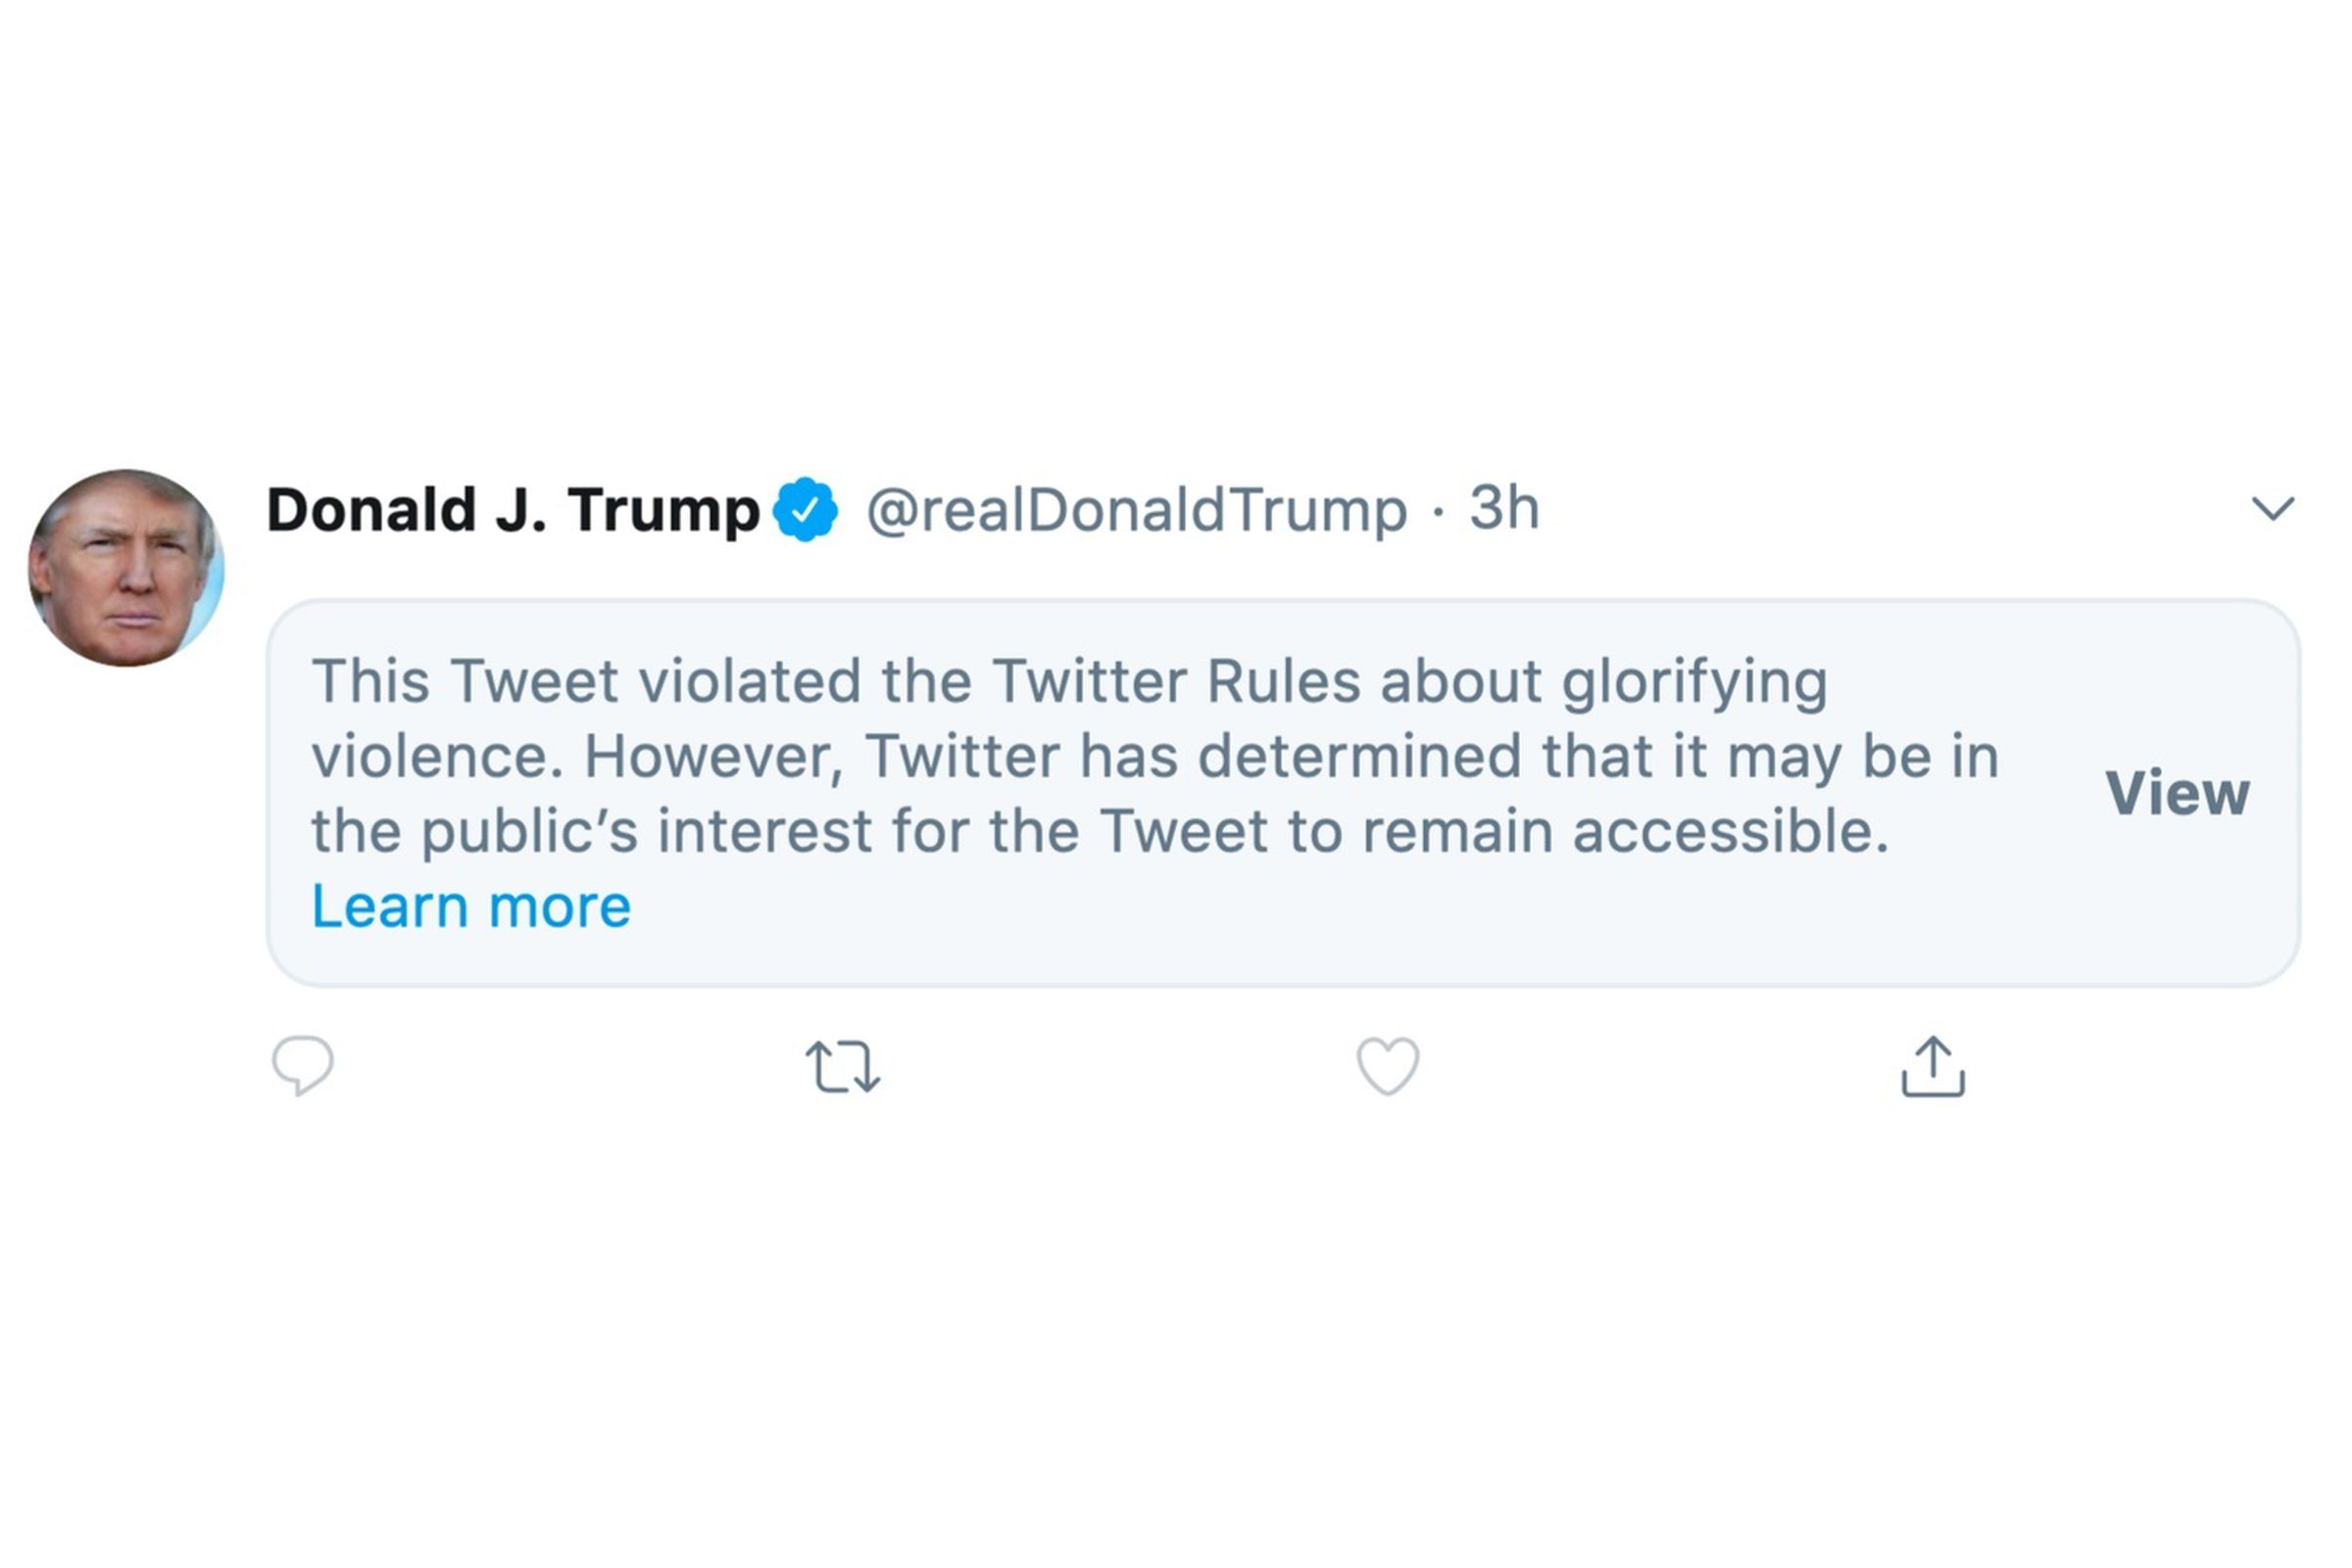 Twitter’s notice, which says that the tweet broke its rules about glorifying violence.